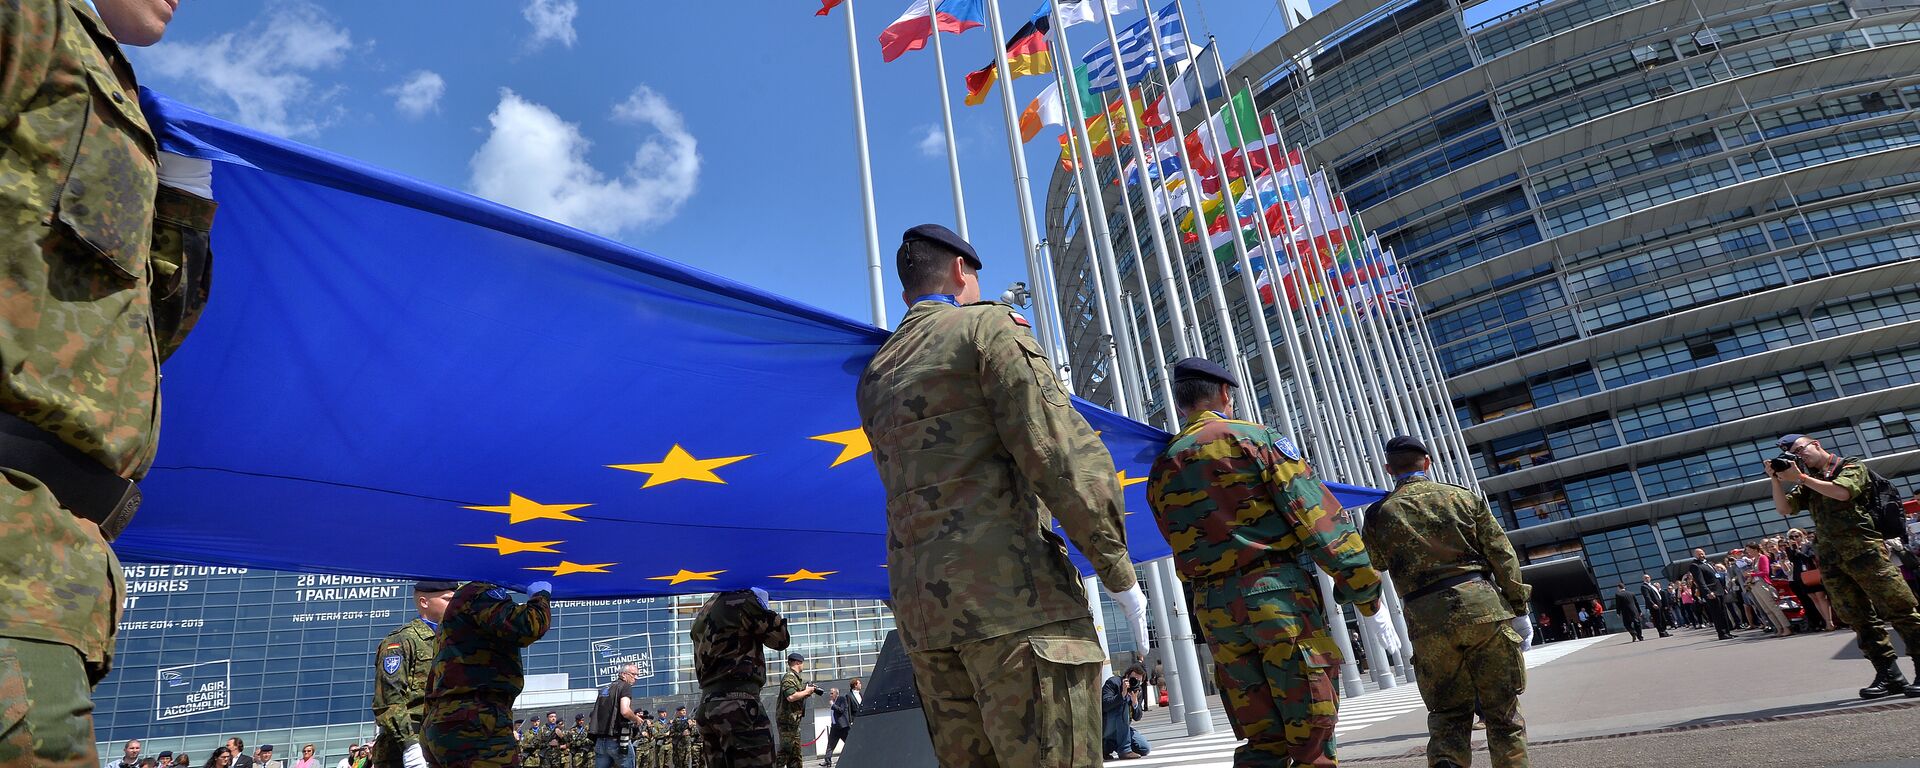 Soldiers of a Eurocorps detachment carry the European Union flag to mark the inaugural European Parliament session in front of the European Parliament in Strasbourg, eastern France (file) - Sputnik International, 1920, 26.01.2024